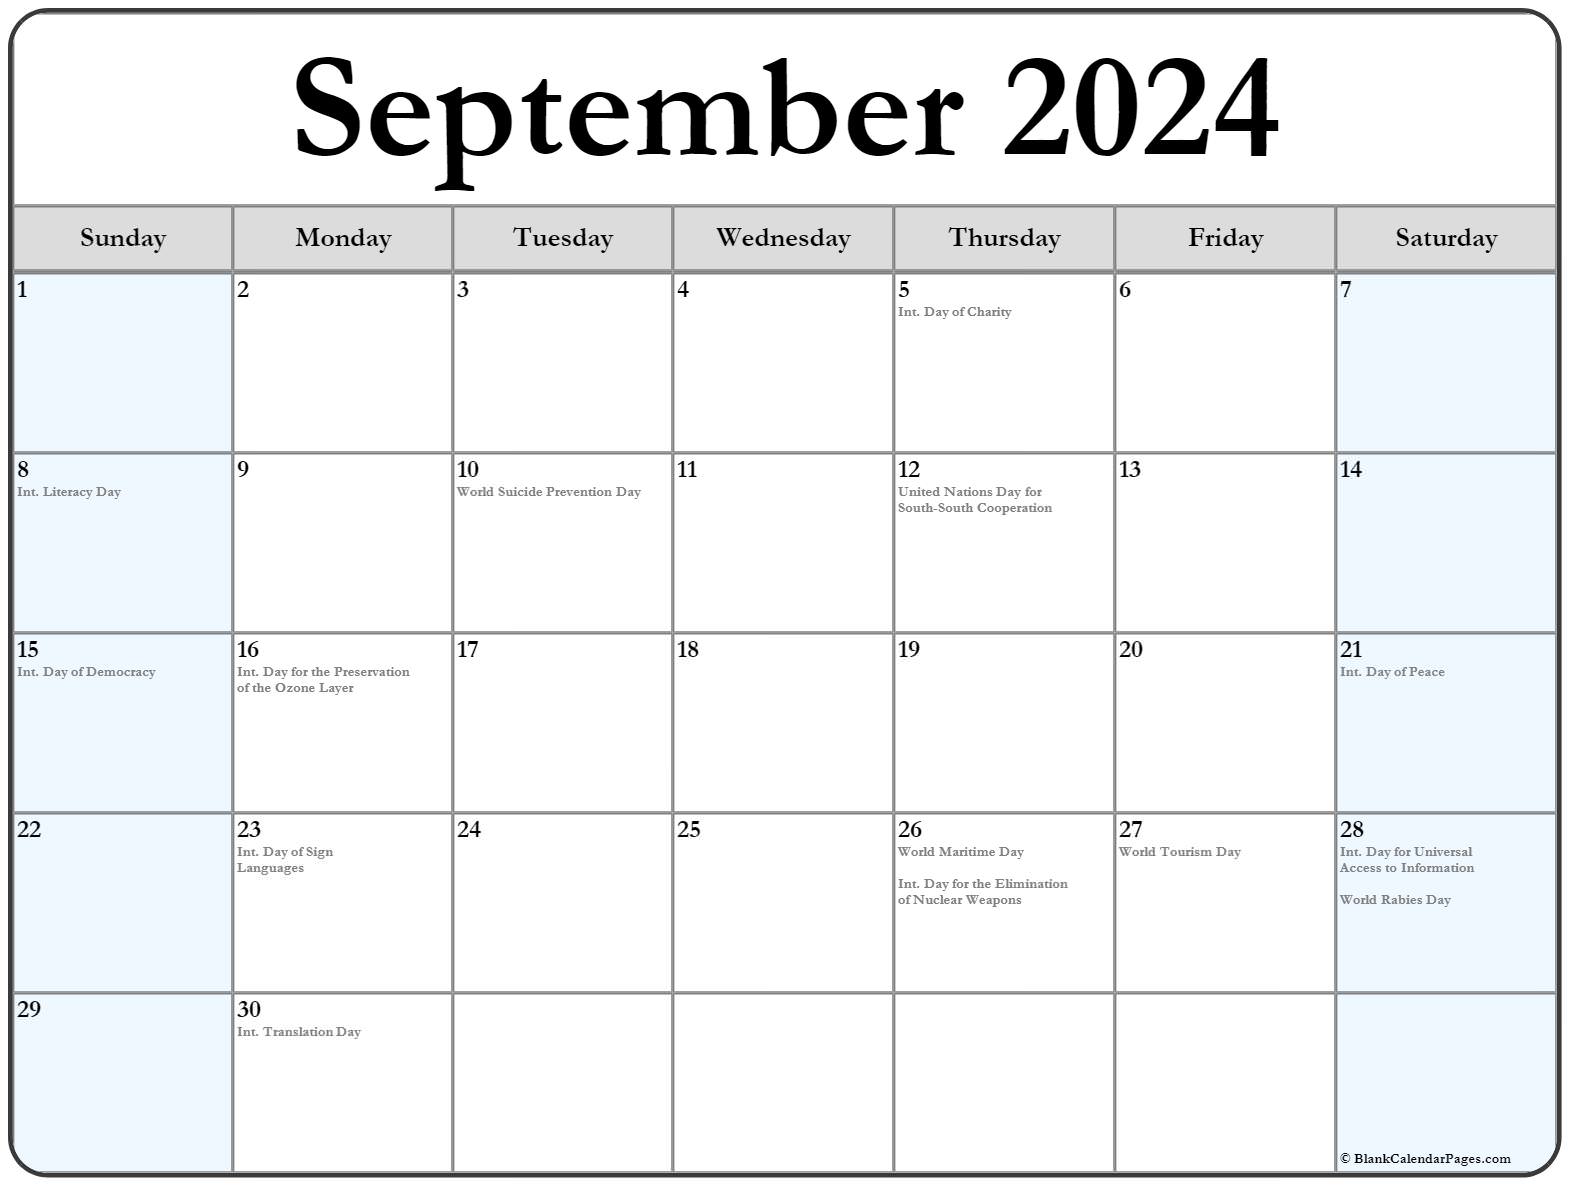 Collection of September 2020 calendars with holidays